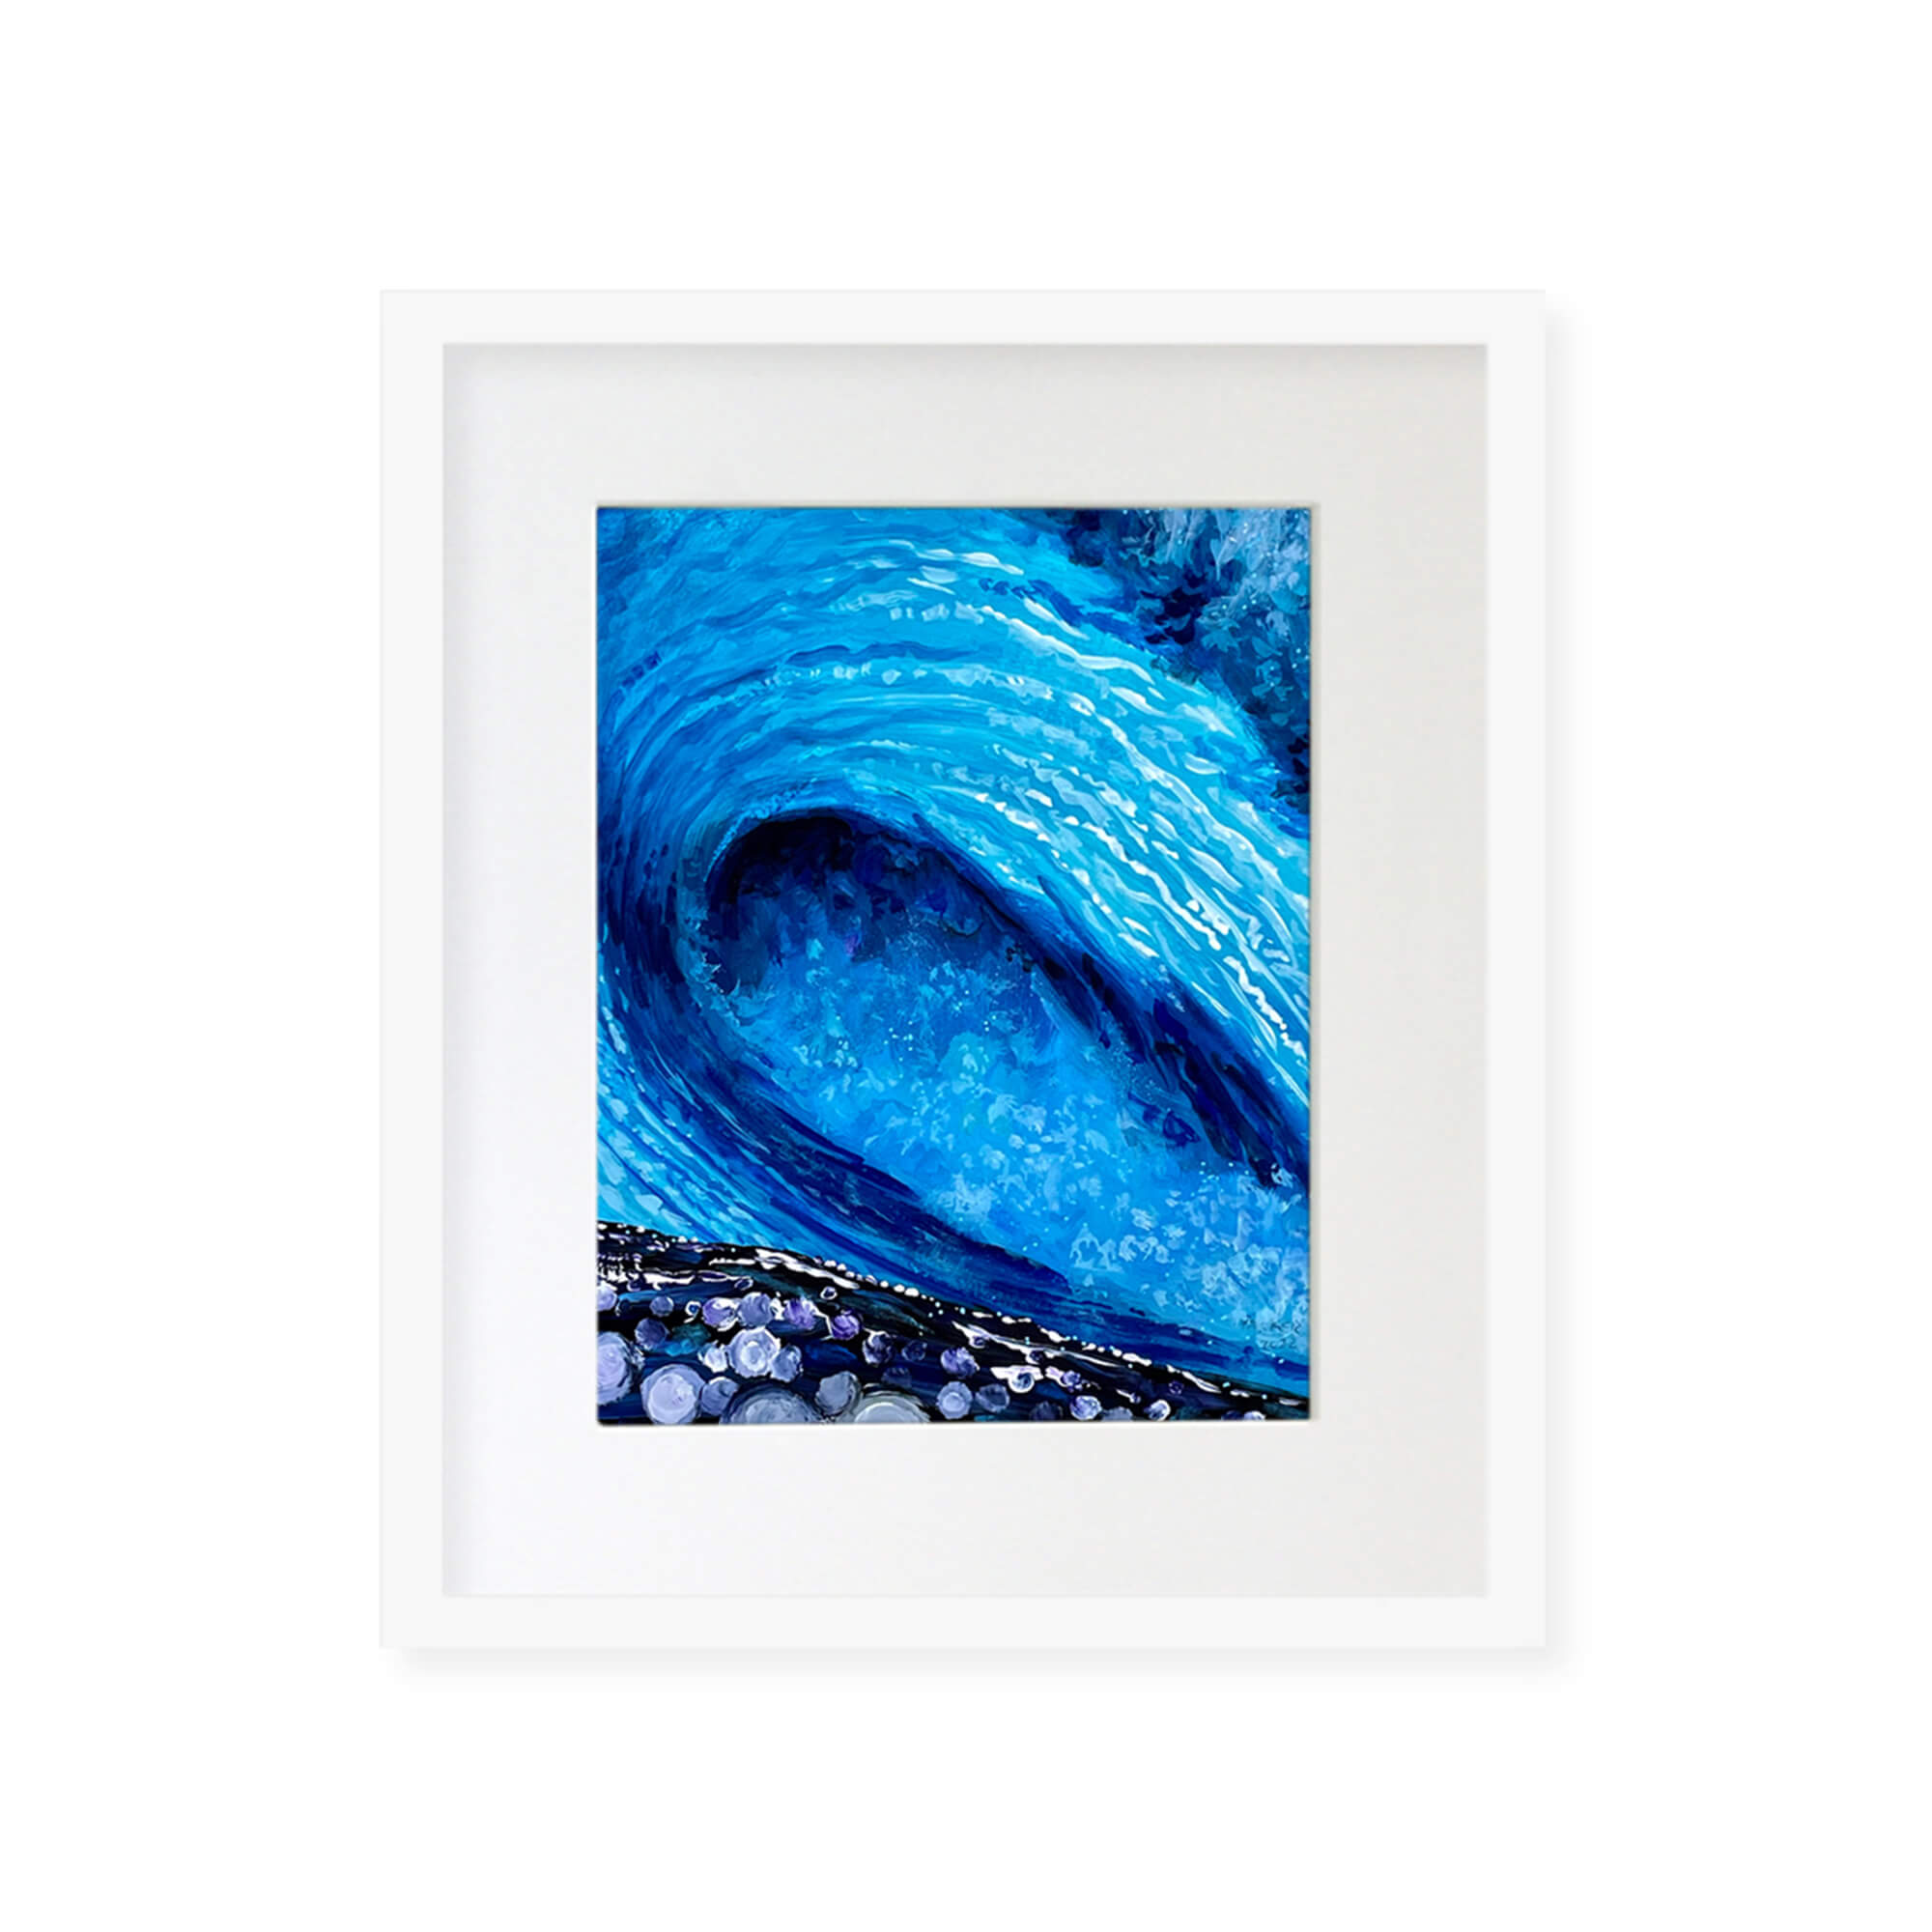 Vibrant blue hued breaking wave by Hawaii artist Patric Parker